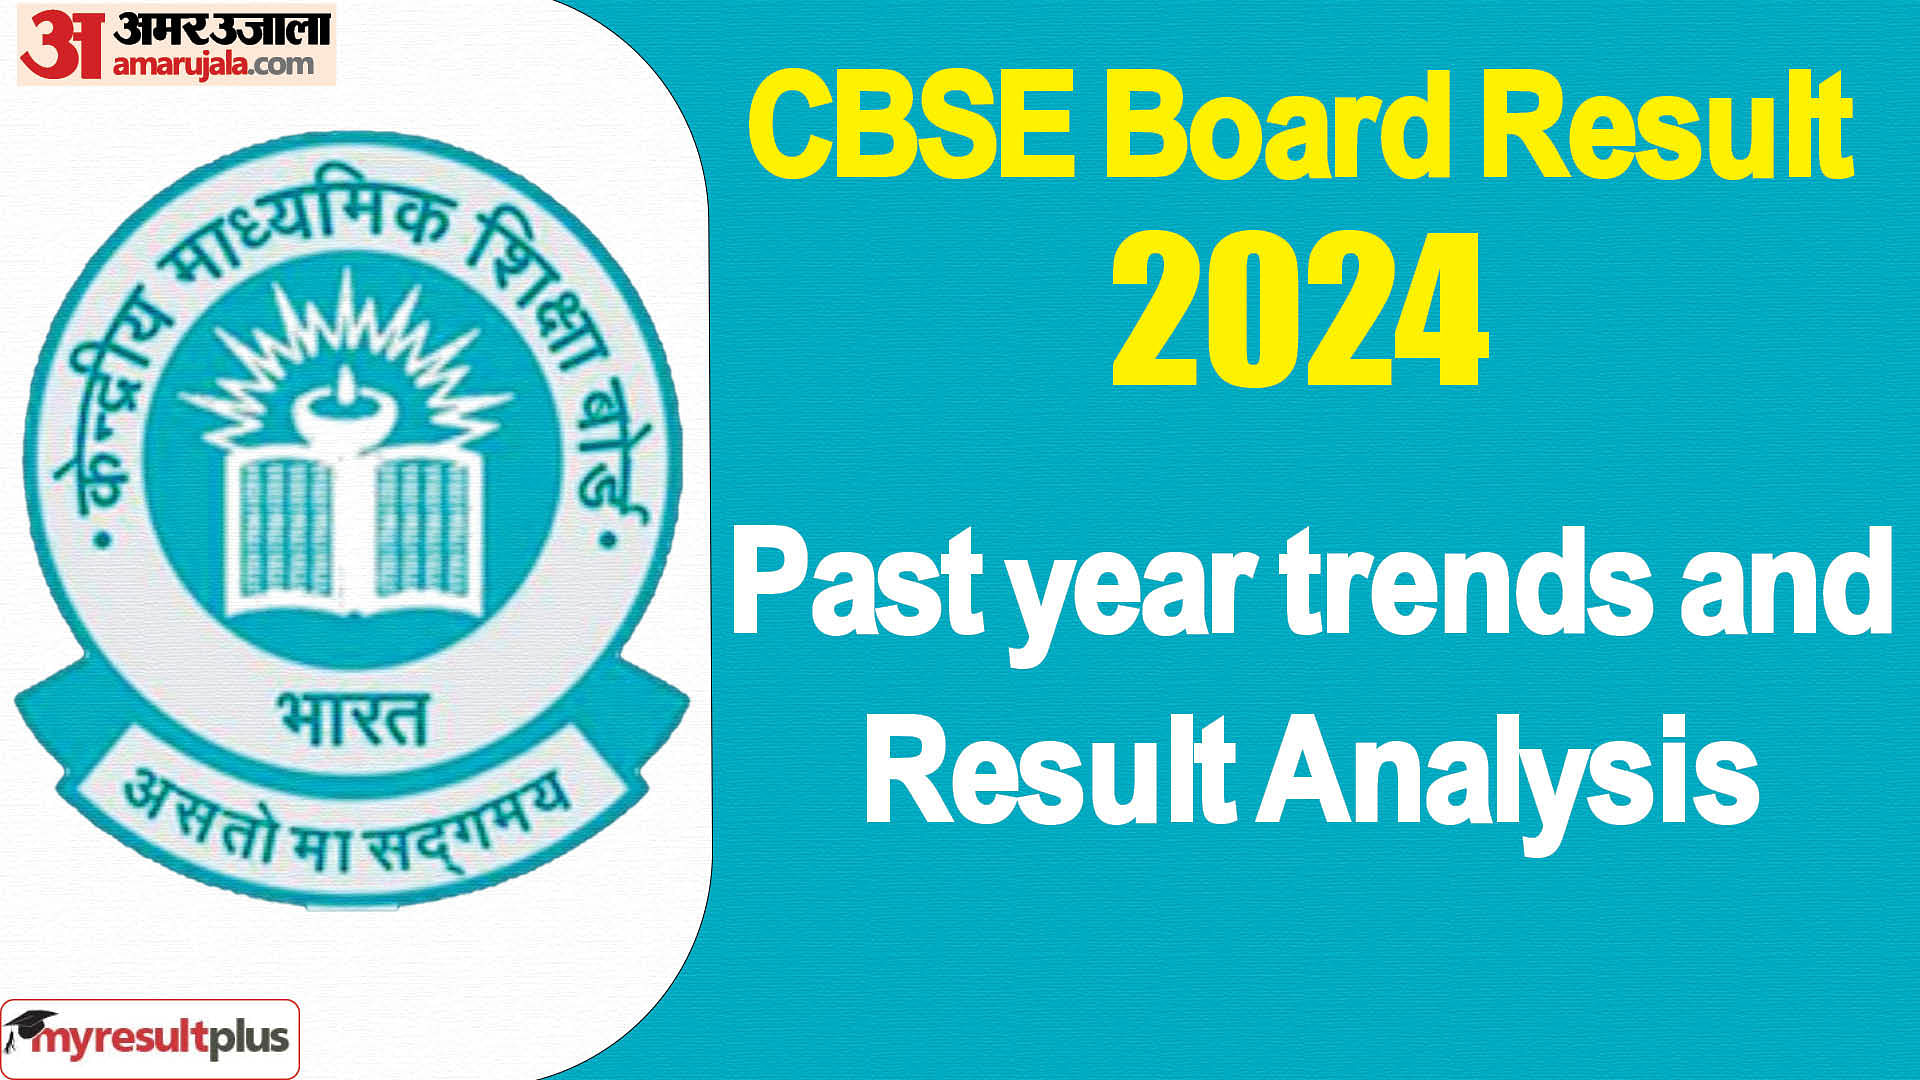 CBSE Board Result 2024 expected soon, Read about the past trends and result analysis here